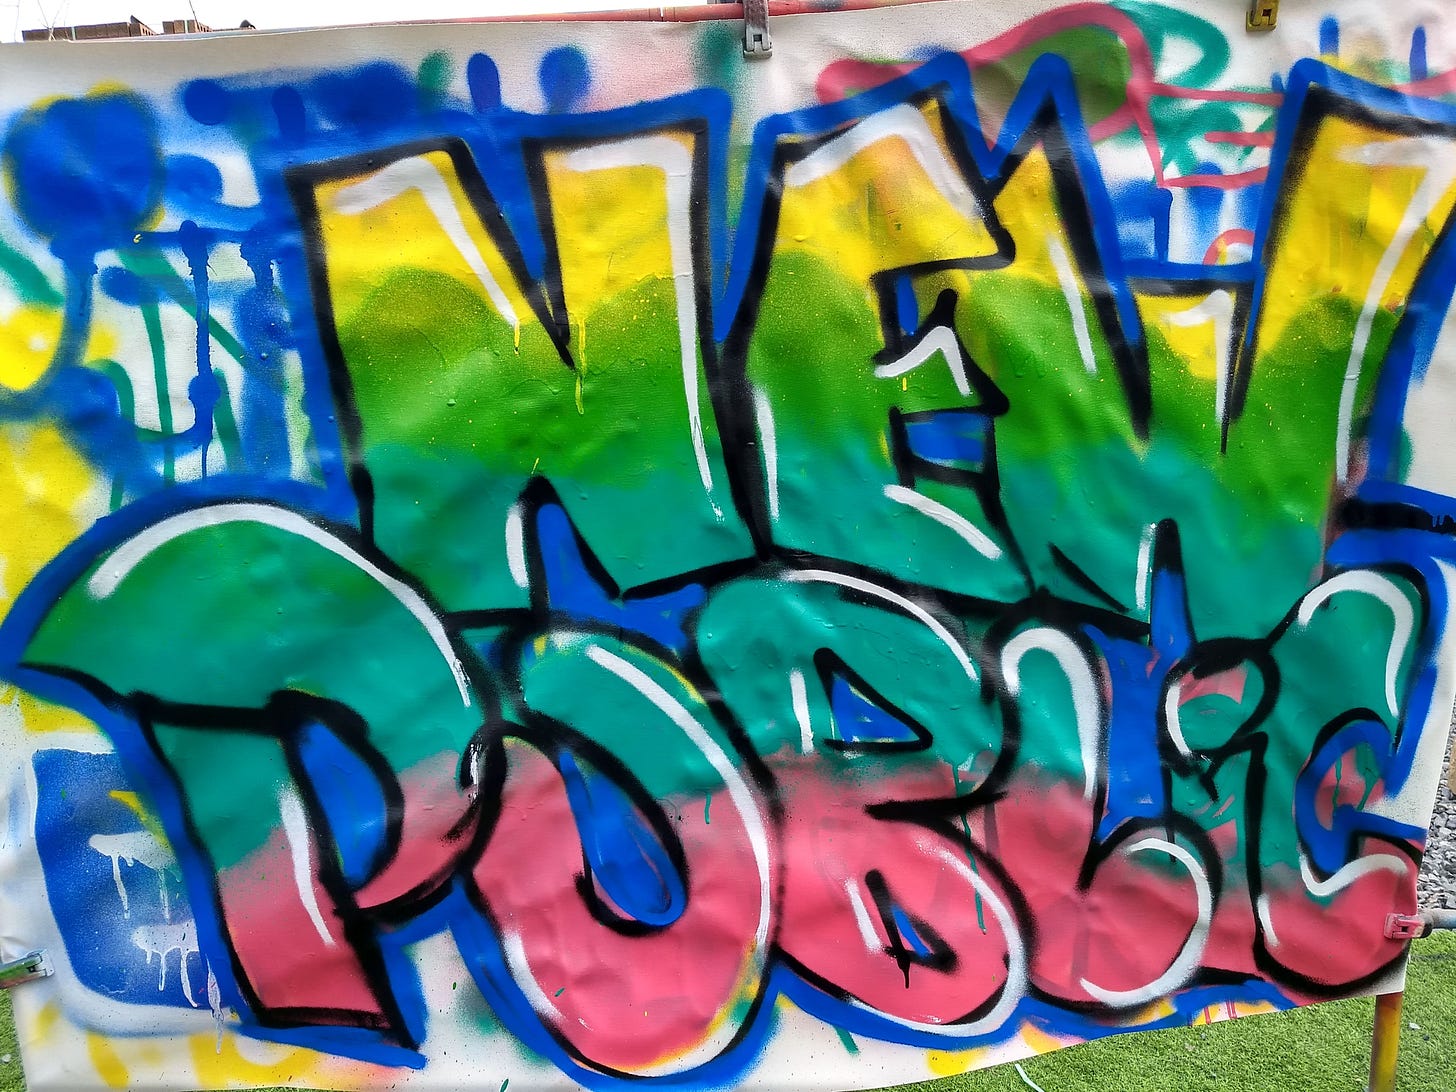 A physical canvas spray painted with big bubble letters reading “New_ Public” in yellow, two greens and pink, with blue, black and white as accents.